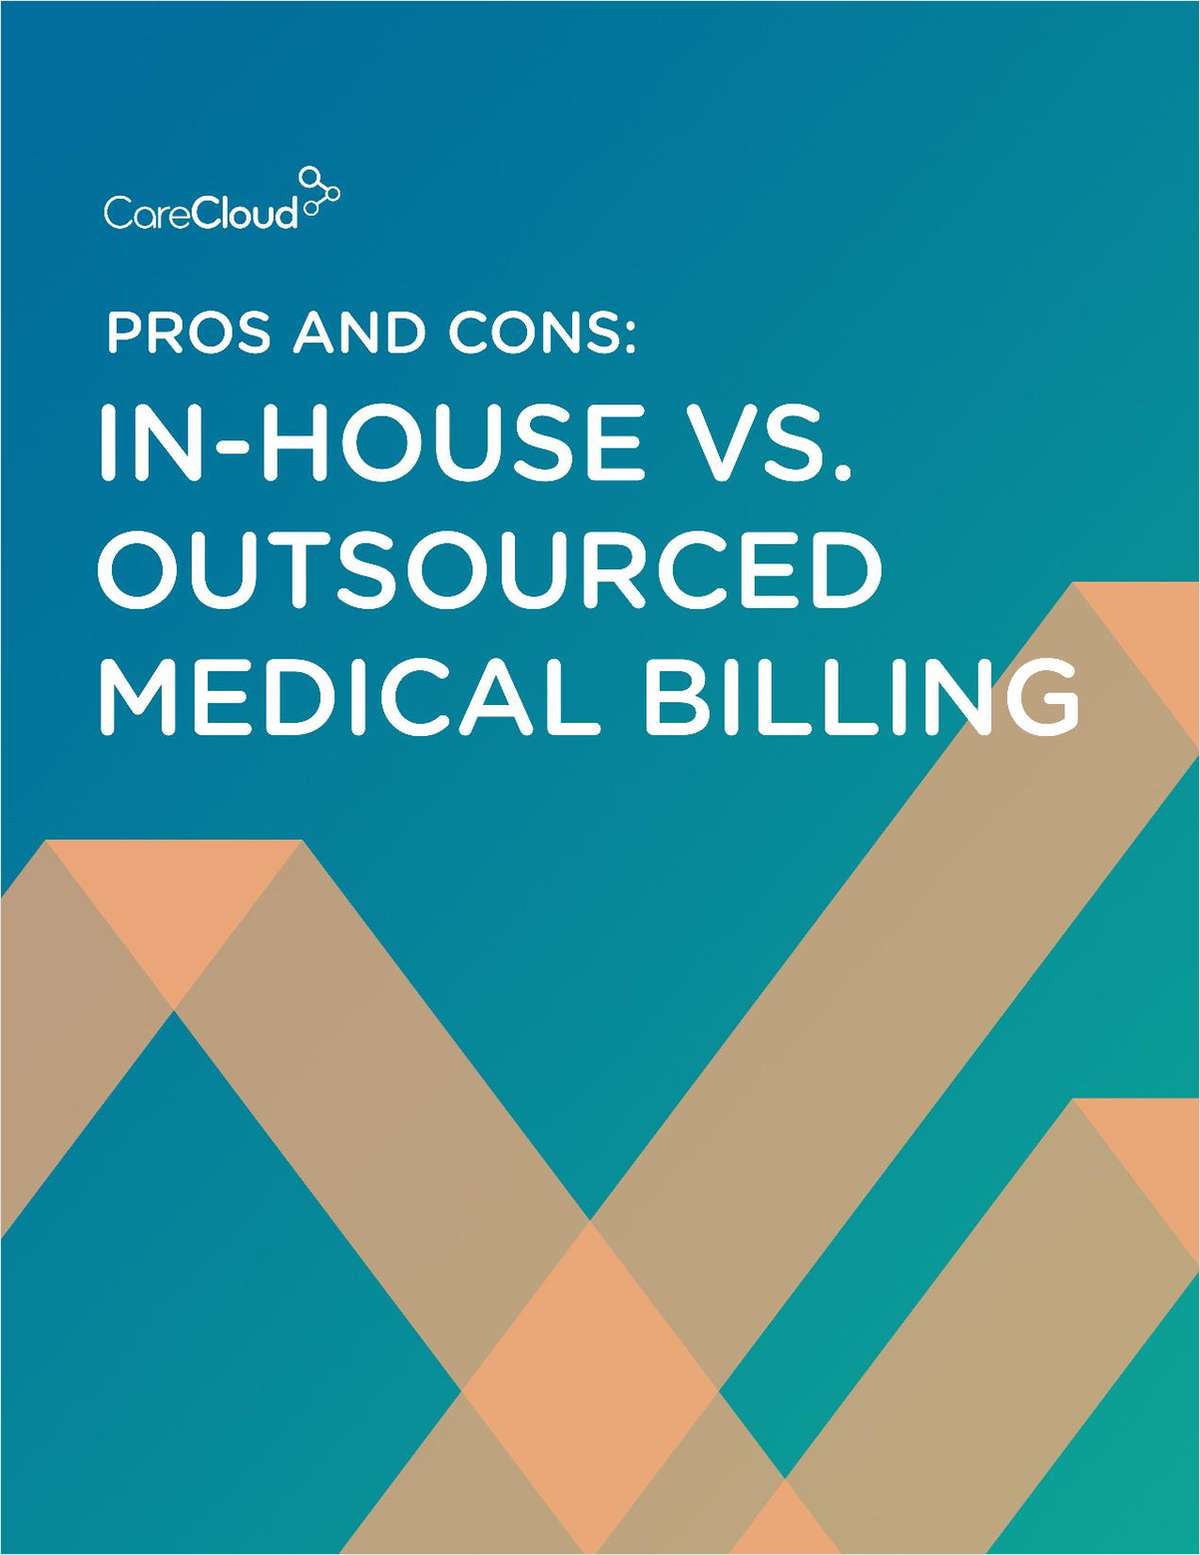 In-House vs. Outsourced Medical Billing